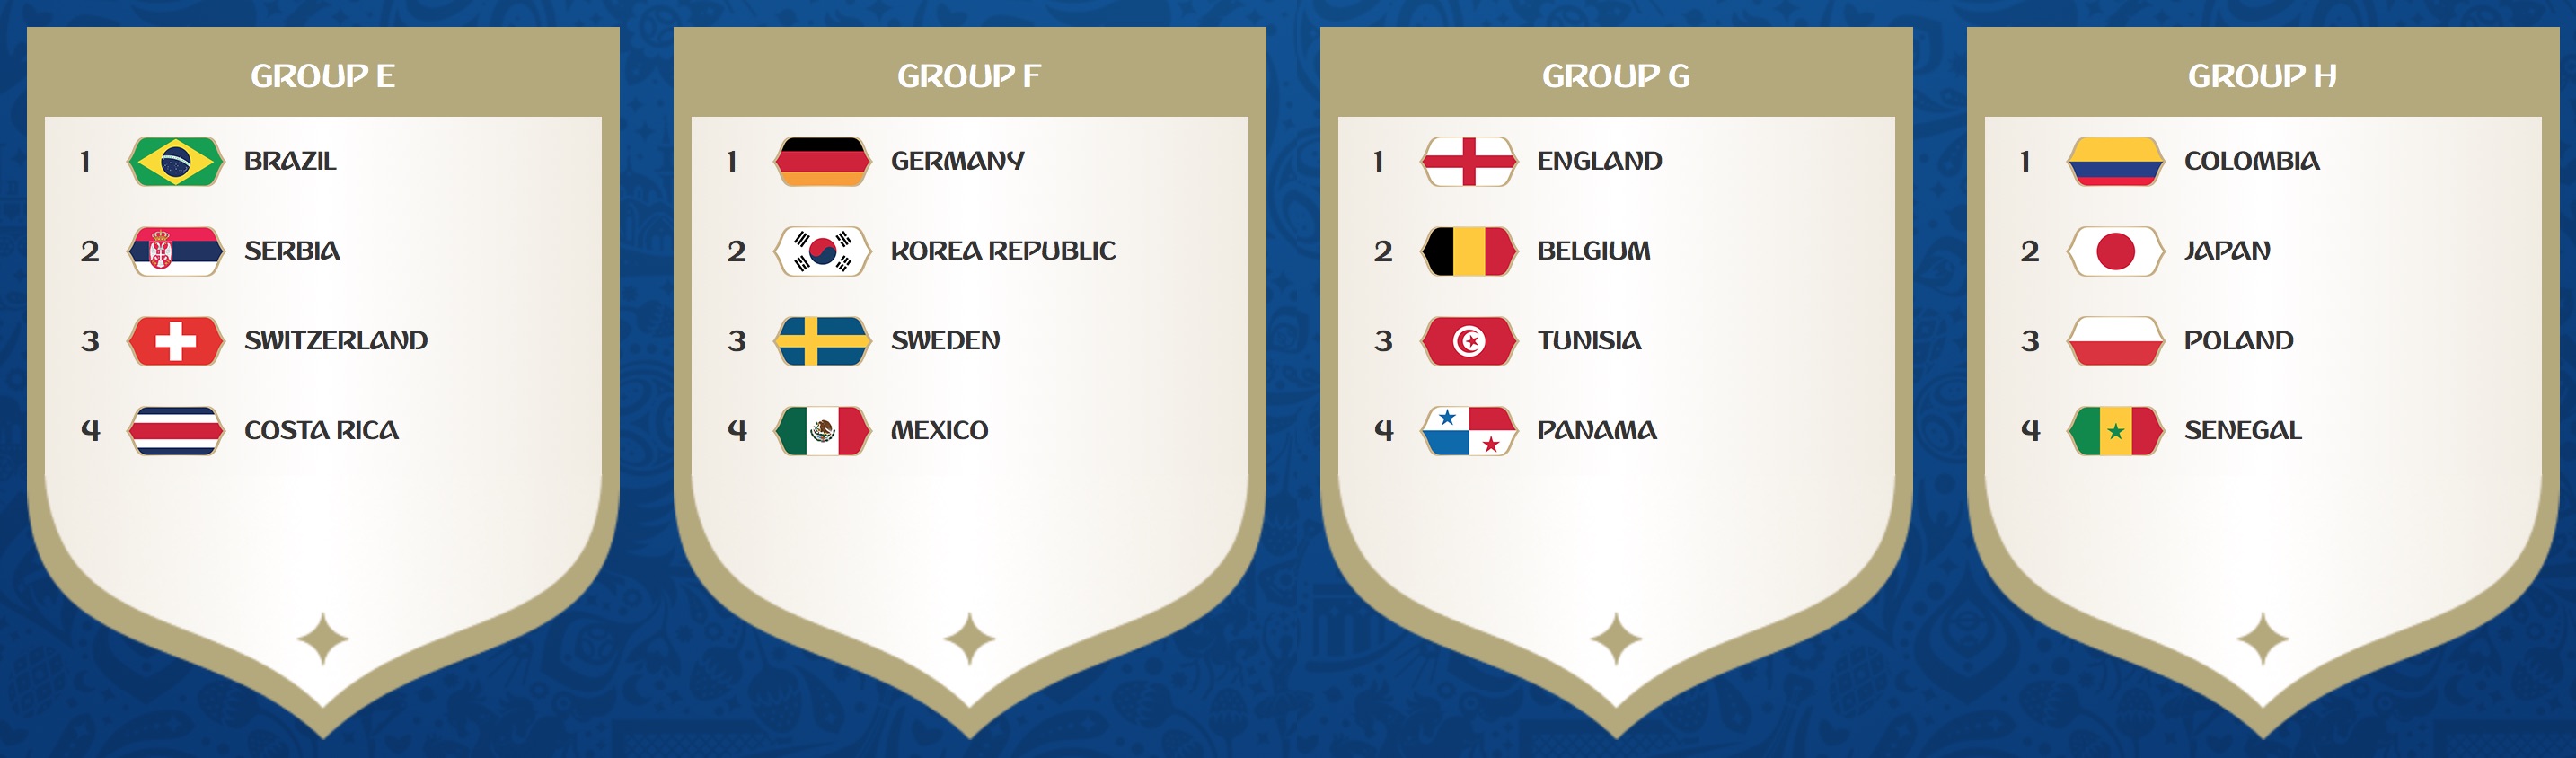 FIFA World Cup 2018 (Russia): Groups E to H